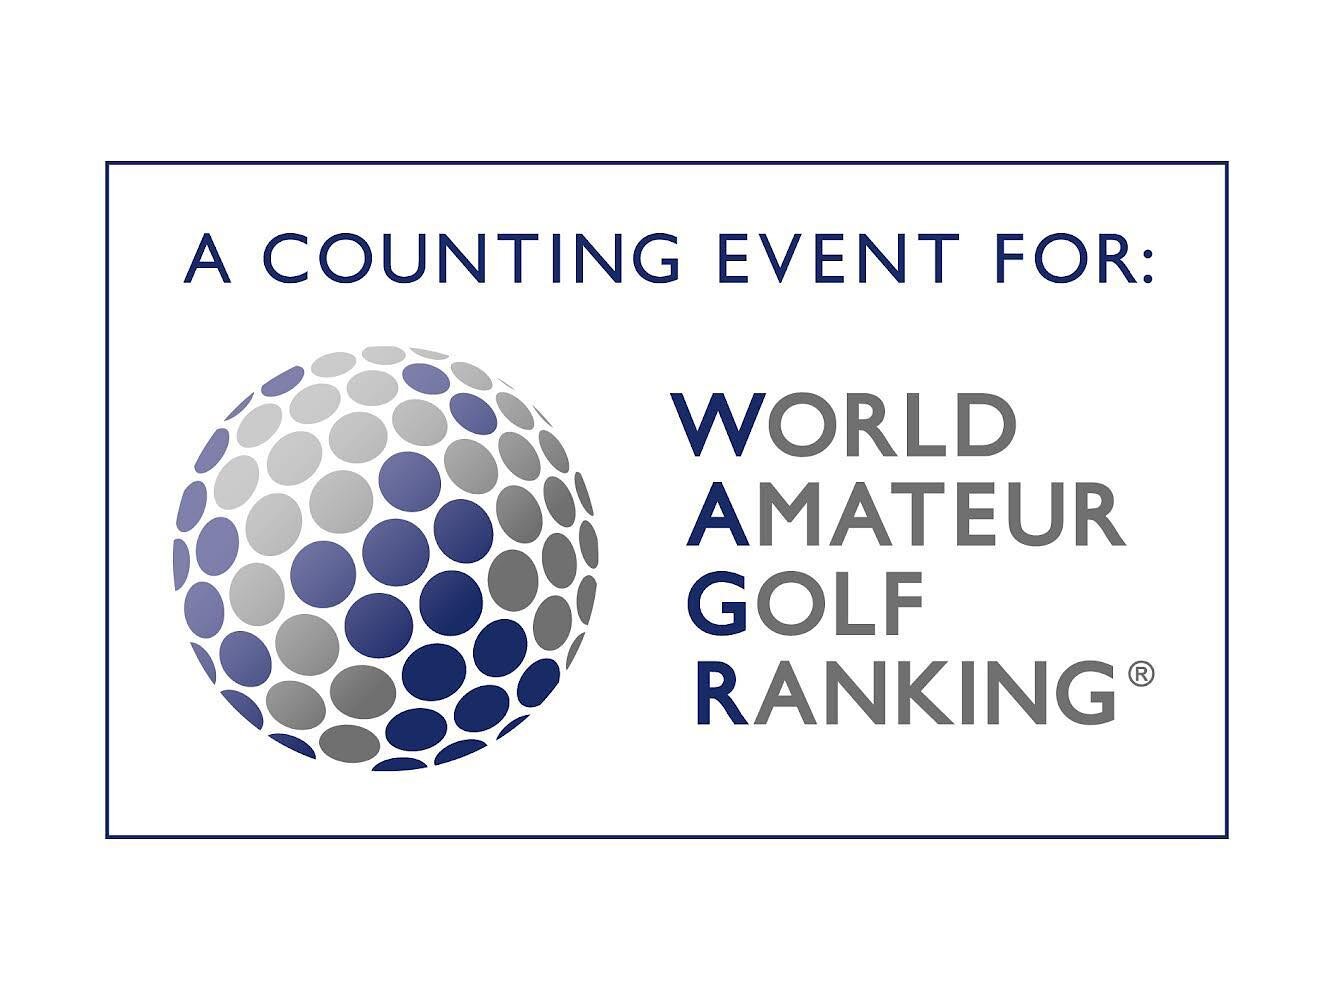 🌟 Exciting News! 🌟

🏌️&zwj;♂️⛳️ We&rsquo;re thrilled to announce that the MDGA Match Play Championship has been recognized as a Counting Event for World Amateur Golf Ranking (WAGR) by the USGA &amp; R&amp;A! 🏌️&zwj;♀️⛳️

Now, you have the opportu